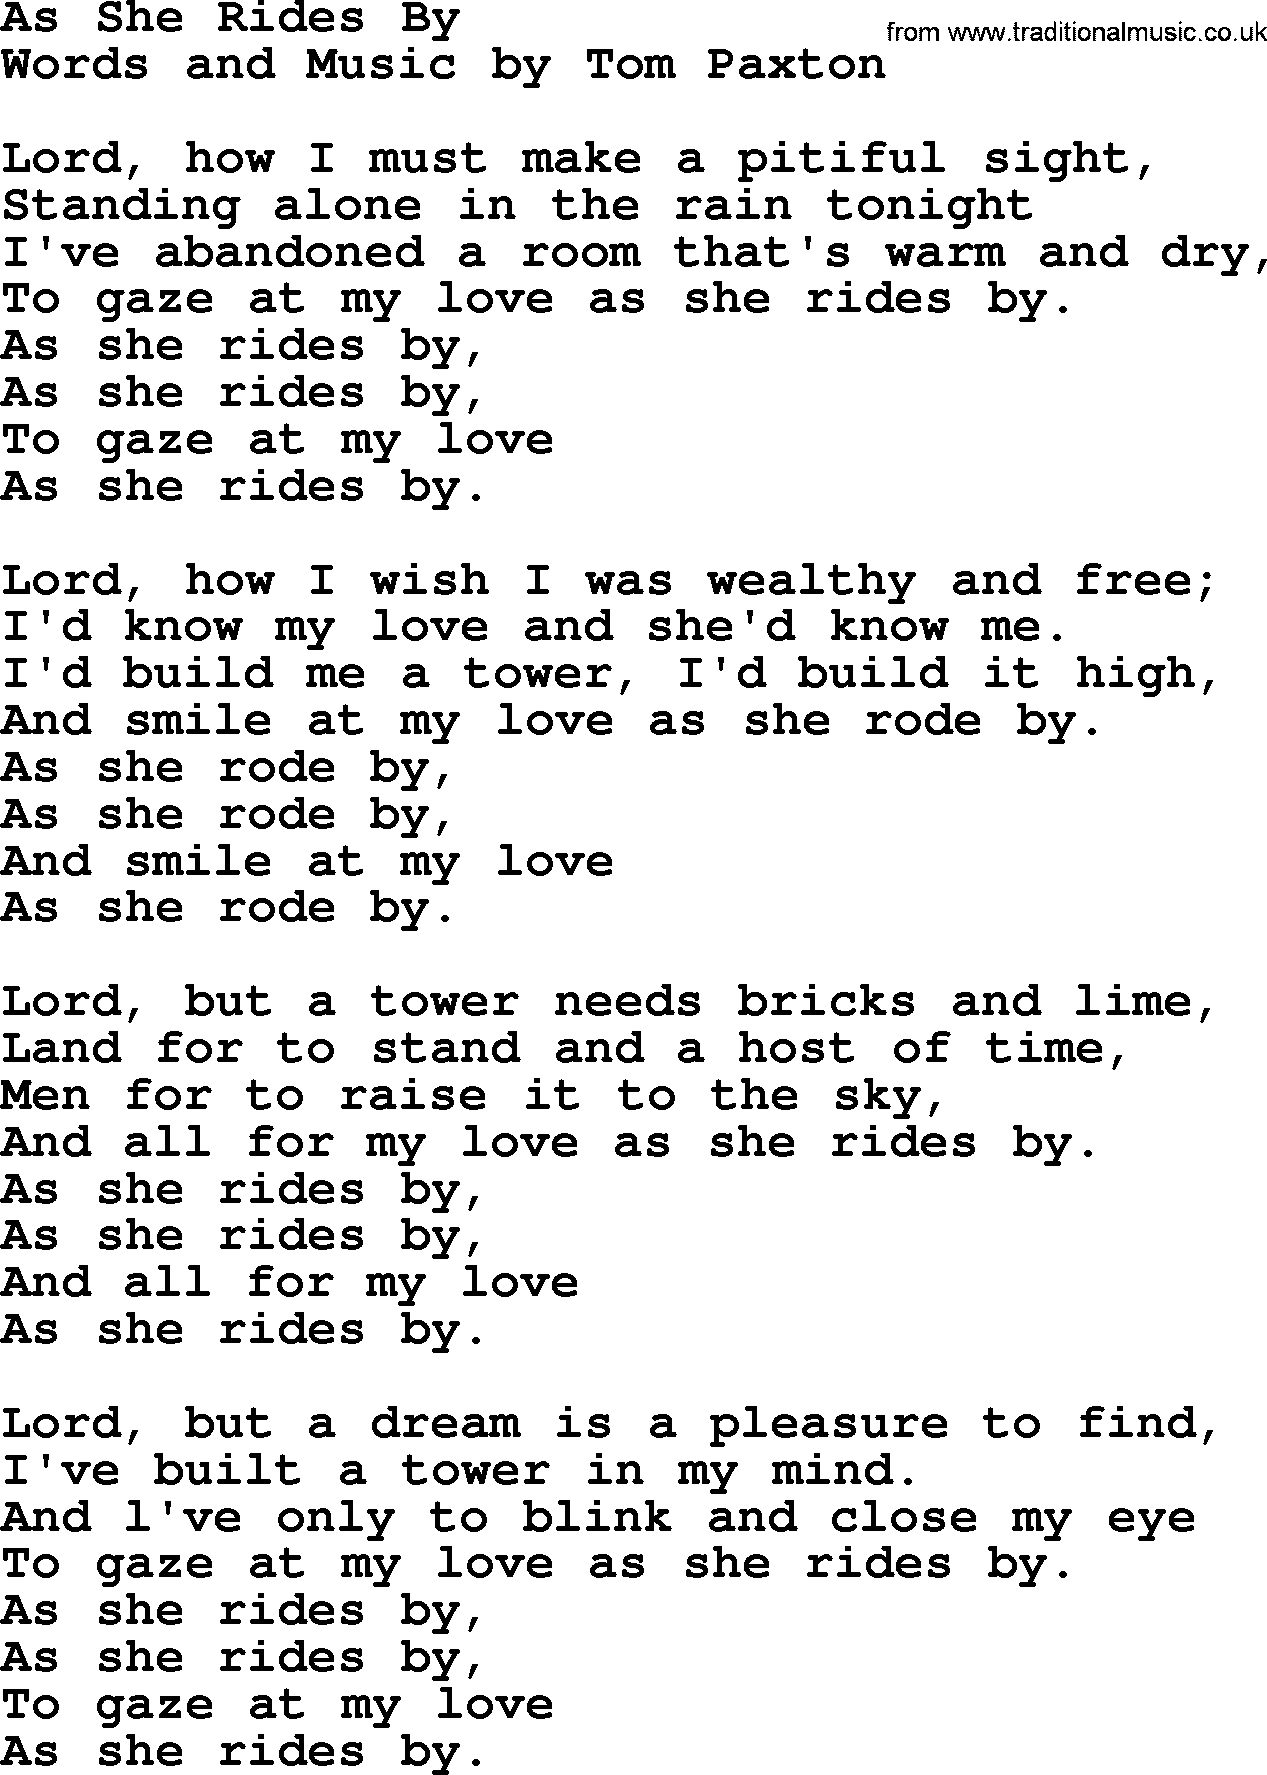 Tom Paxton song: As She Rides By, lyrics